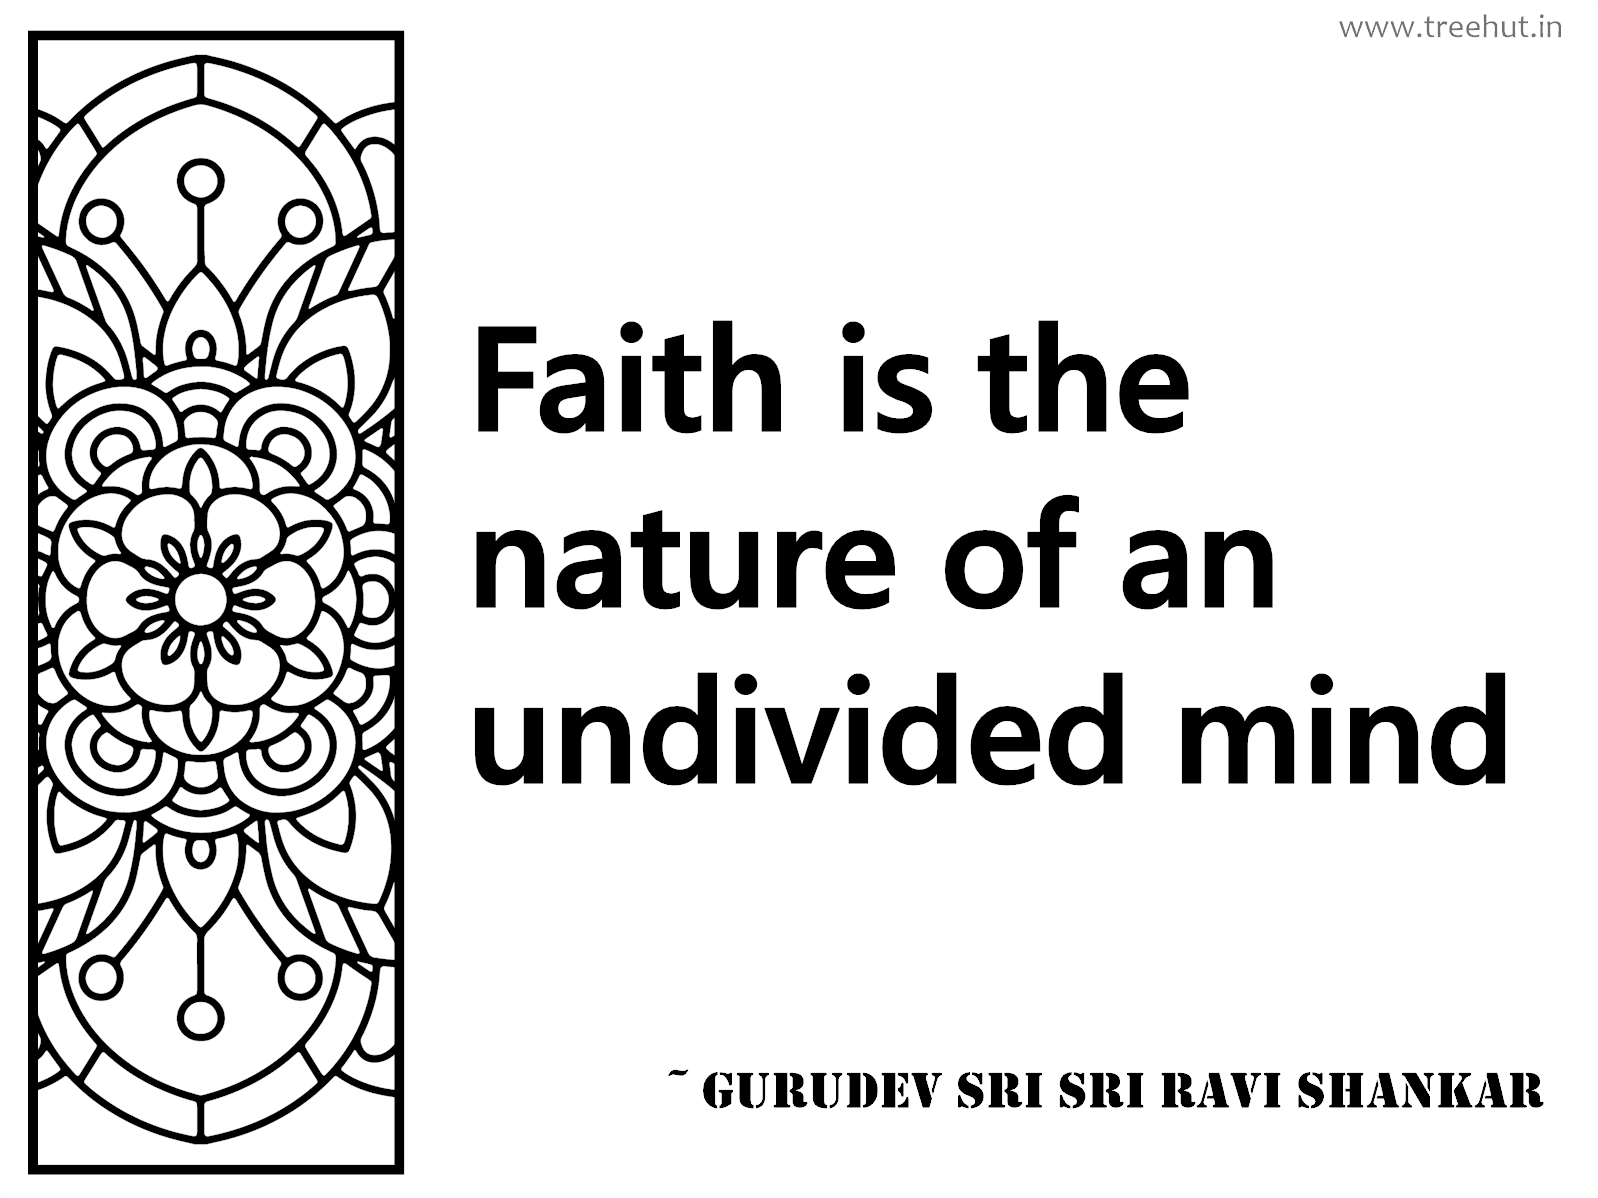 Faith is the nature of an undivided mind Inspirational Quote by Gurudev Sri Sri Ravi Shankar, coloring pages